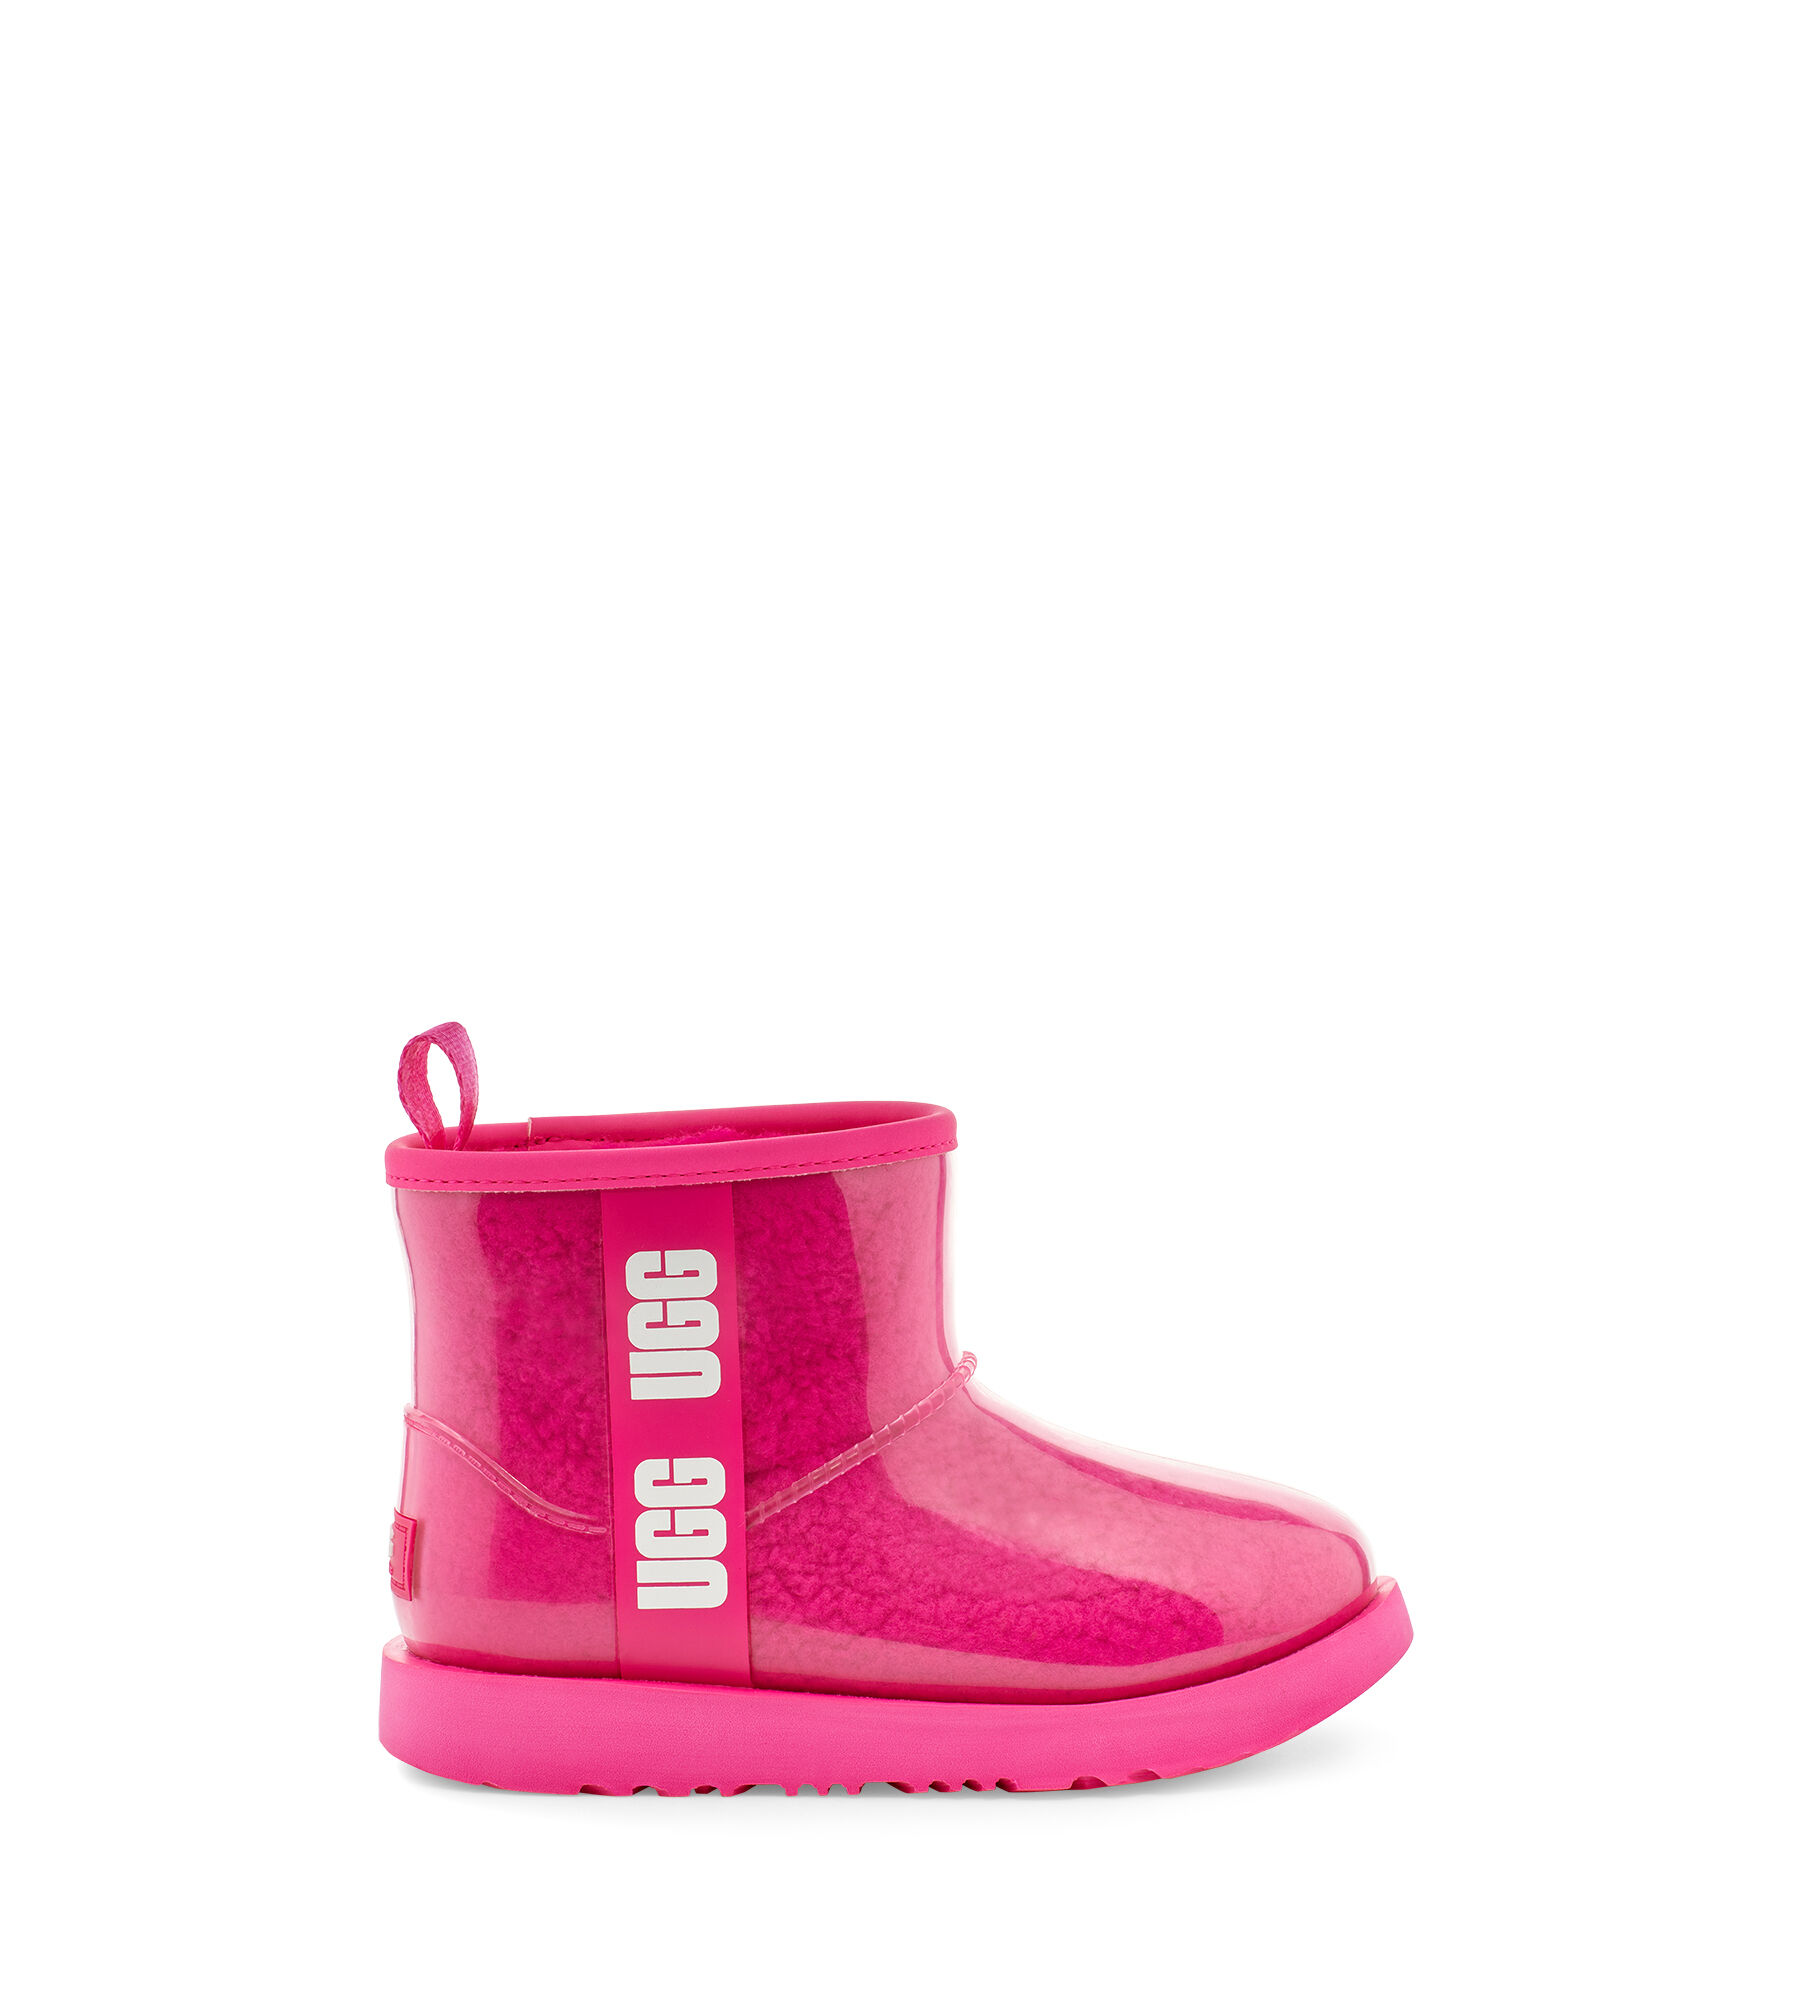 Kid's Shoes \u0026 Boots Collection | UGG 